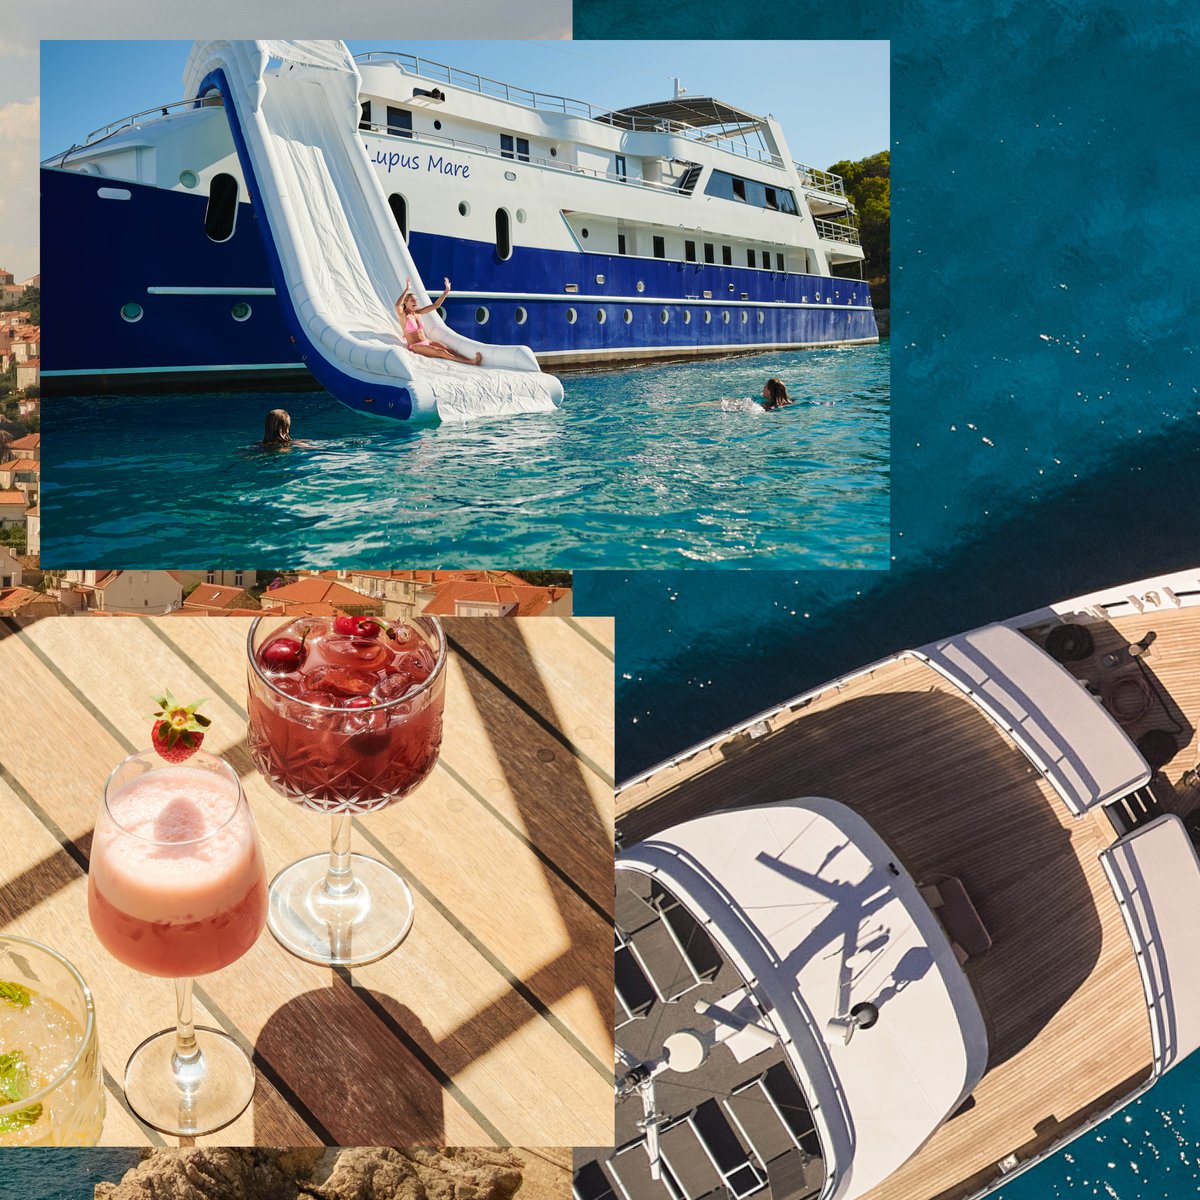 Charter the magnificent Lupus Mare this summer. A perfect option for larger groups looking to cruise the Adriatic coast

View: bit.ly/435qkwt

Enquire: Charter@westnautical.com

#Croatia #superyachts #yachts  #dubrovnikyacht #explorecroatia  #luxuryholiday #yachtholiday